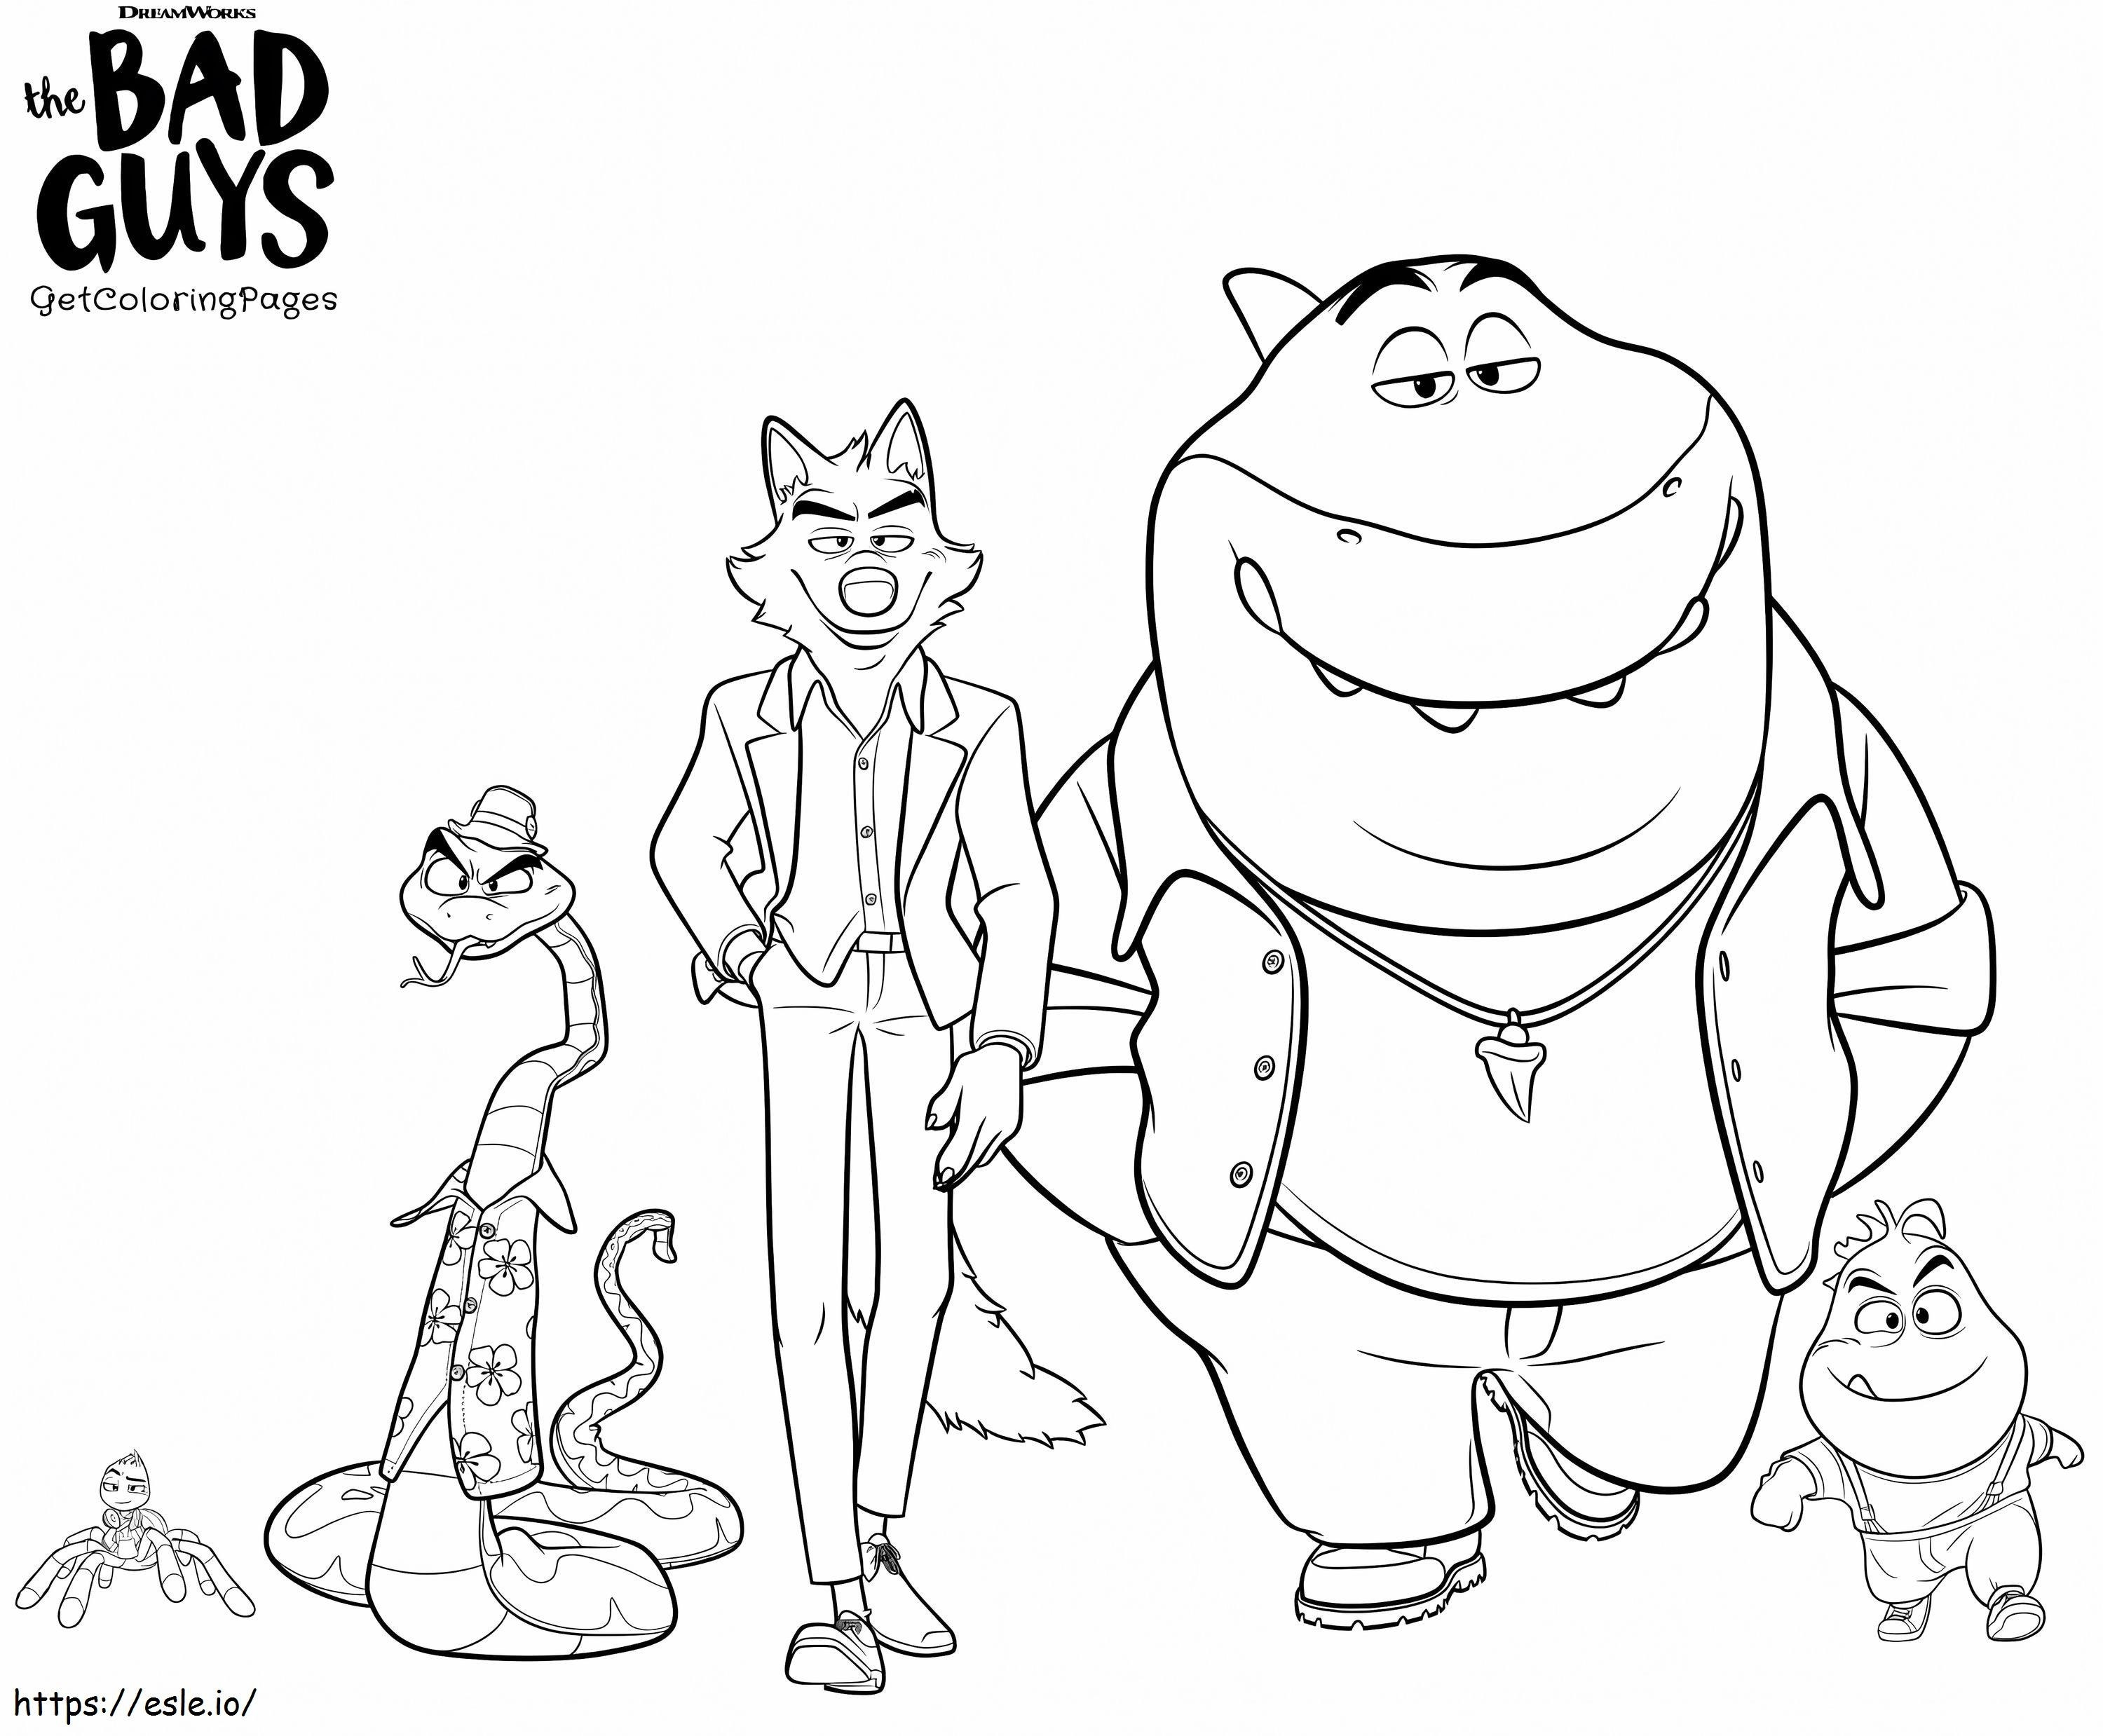 Free Printable The Bad Guys coloring page